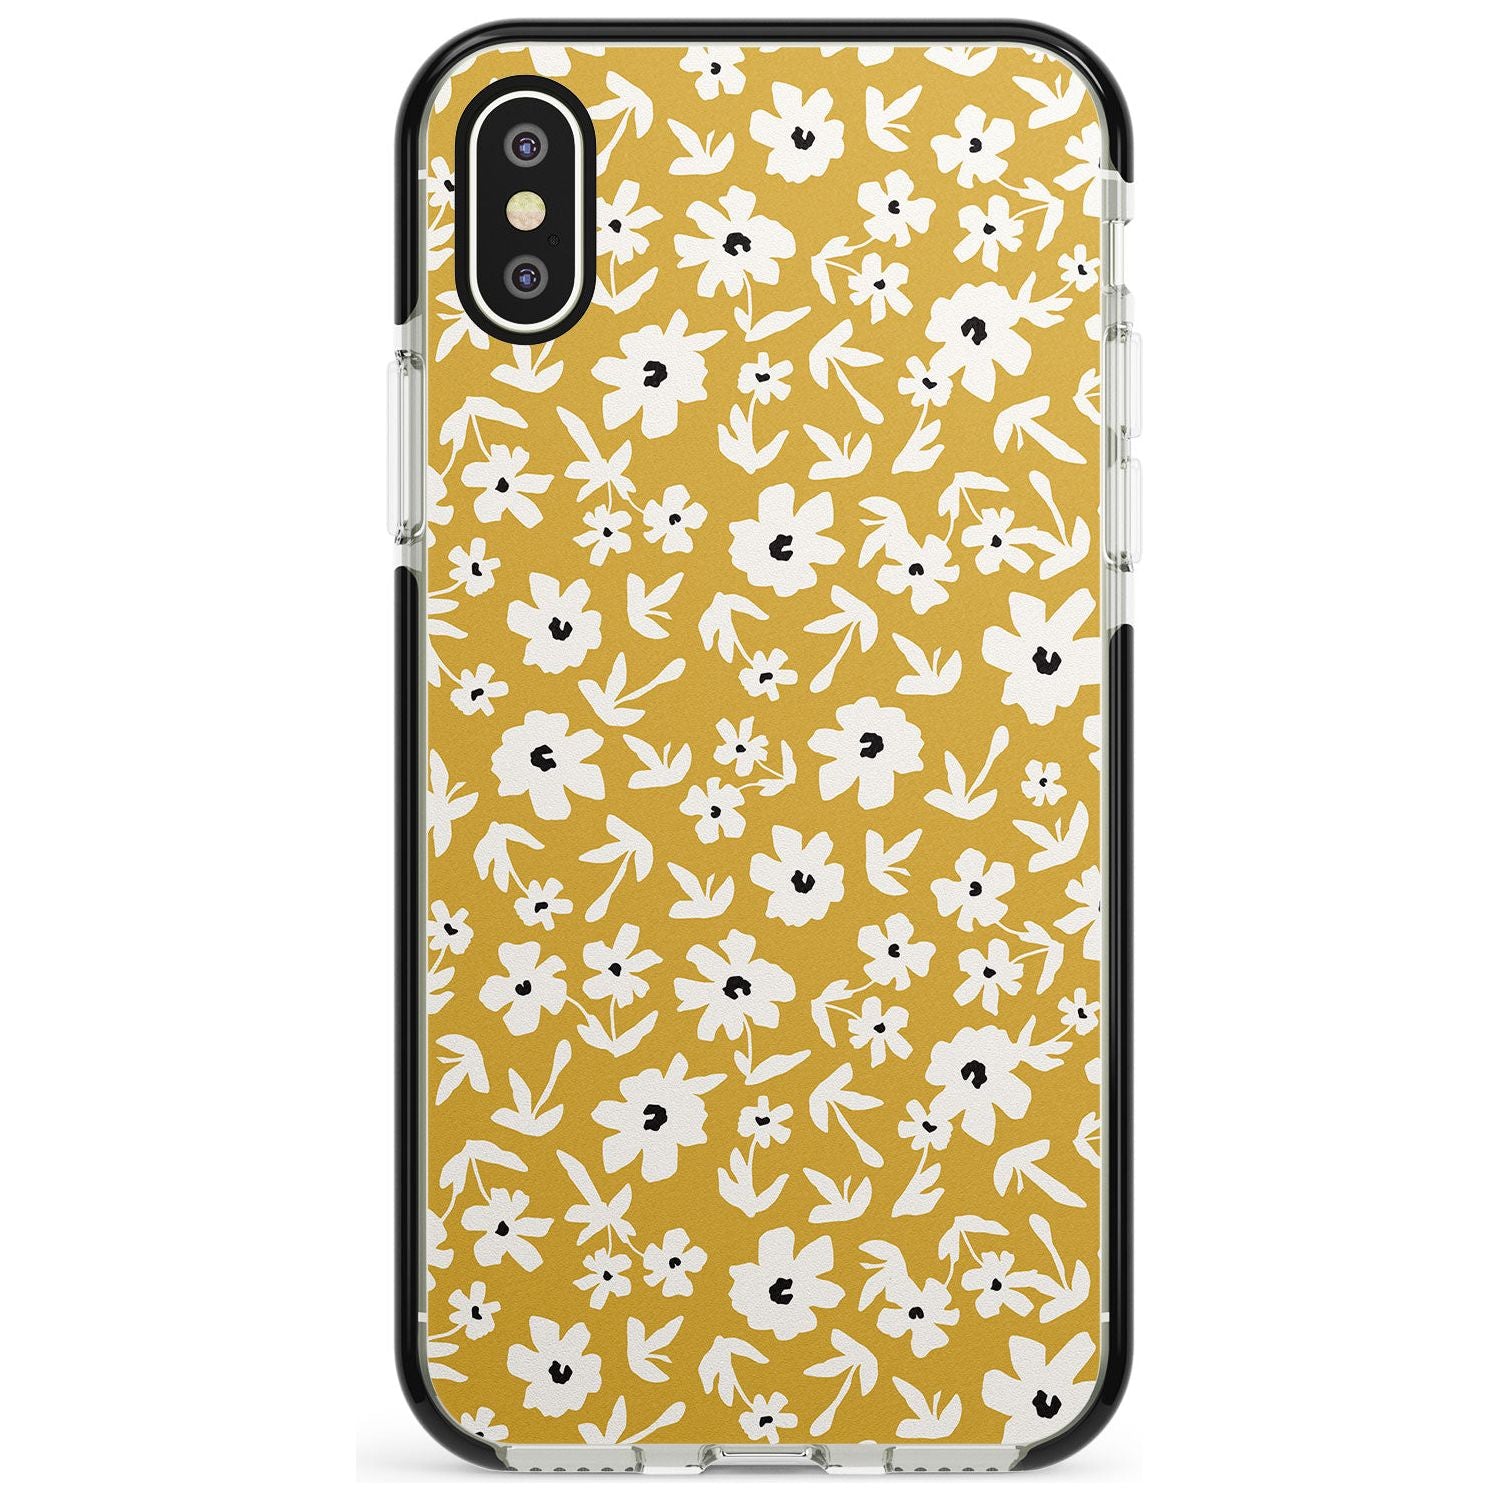 Floral Print on Mustard - Cute Floral Design Pink Fade Impact Phone Case for iPhone X XS Max XR